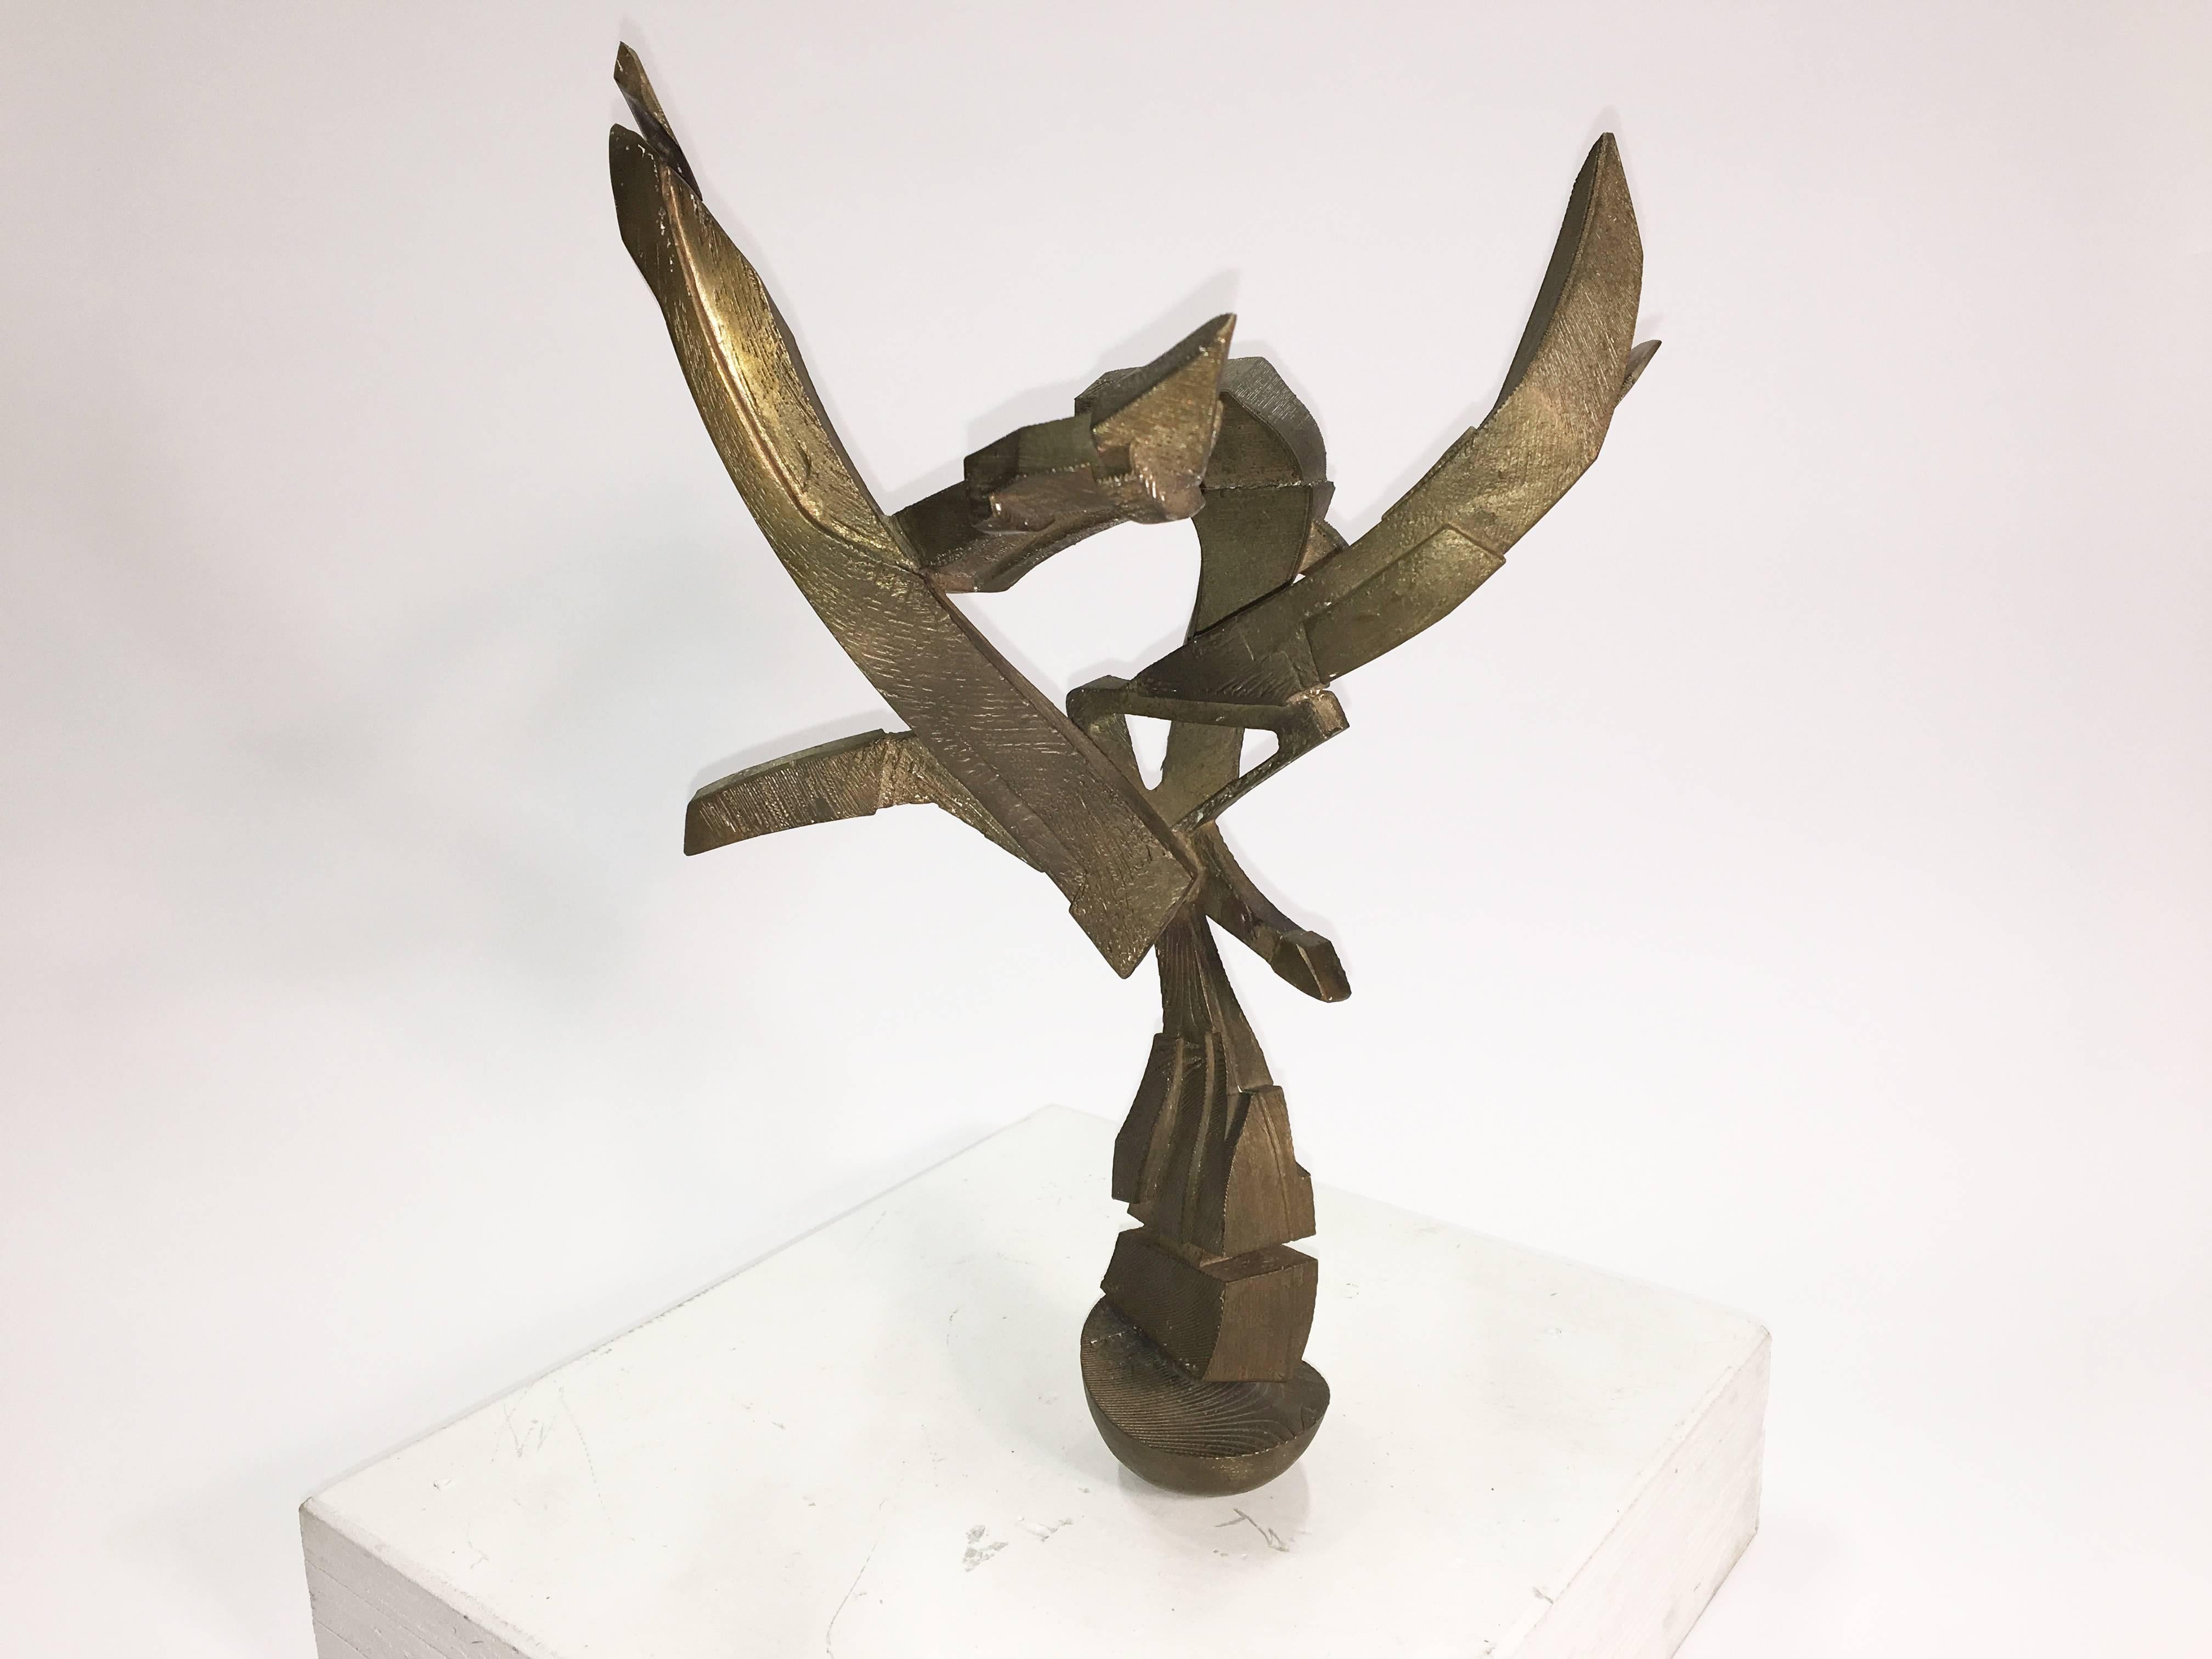 Beautiful sculpture by artist Michael Walsh. 

Michael Walsh has been exhibiting extensively throughout North America and Europe since 1994. His work has been featured at the Carnegie Museum of Art, National Archaeological Museum in Florence,